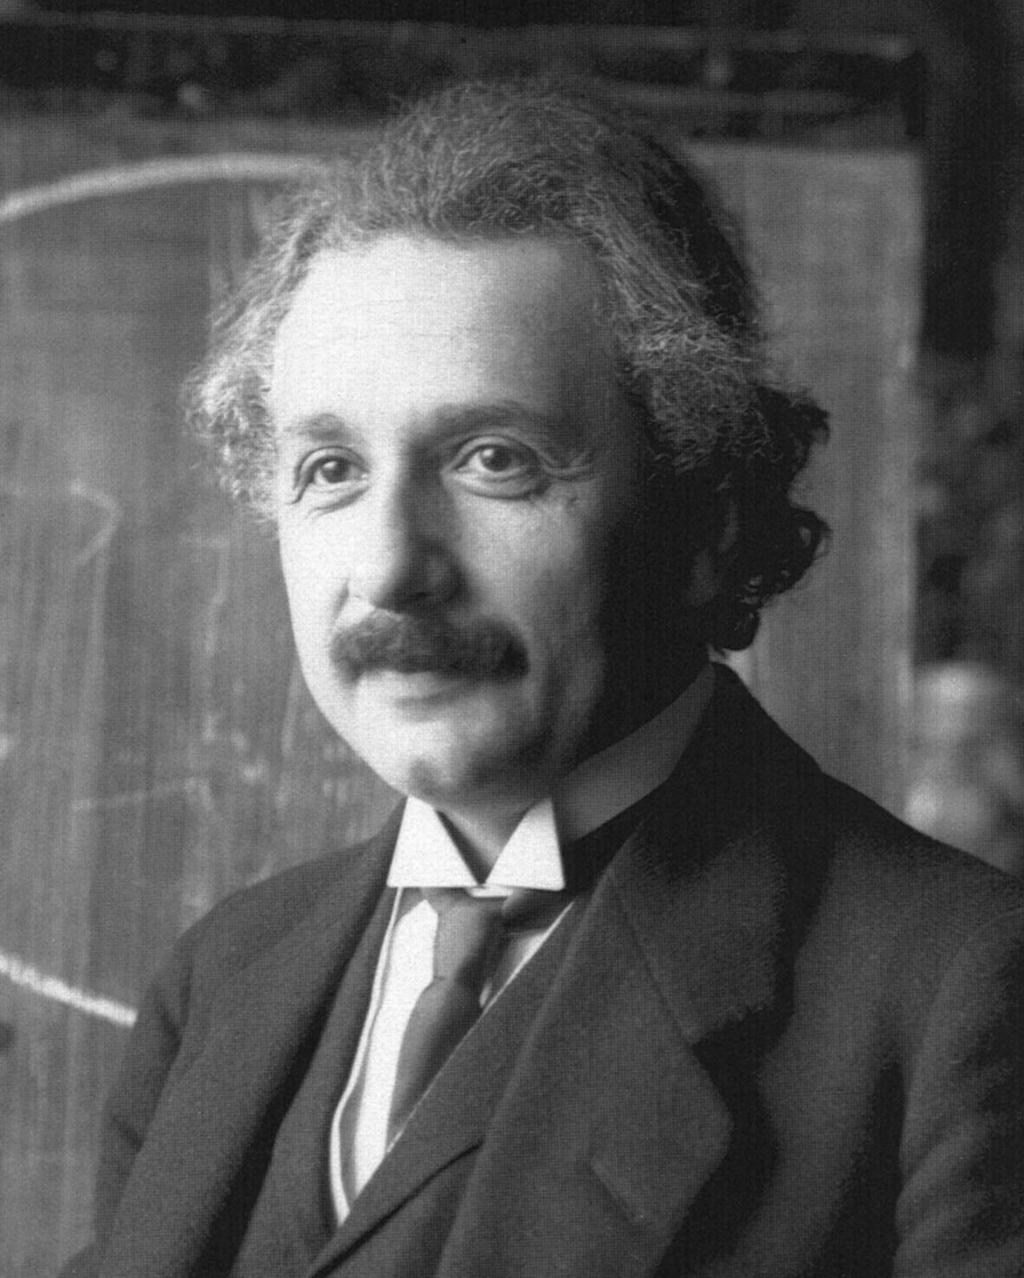 Einstein s Opinion Thermodynamics is the only physical theory of universal content which I am convinced, within the areas of applicability of